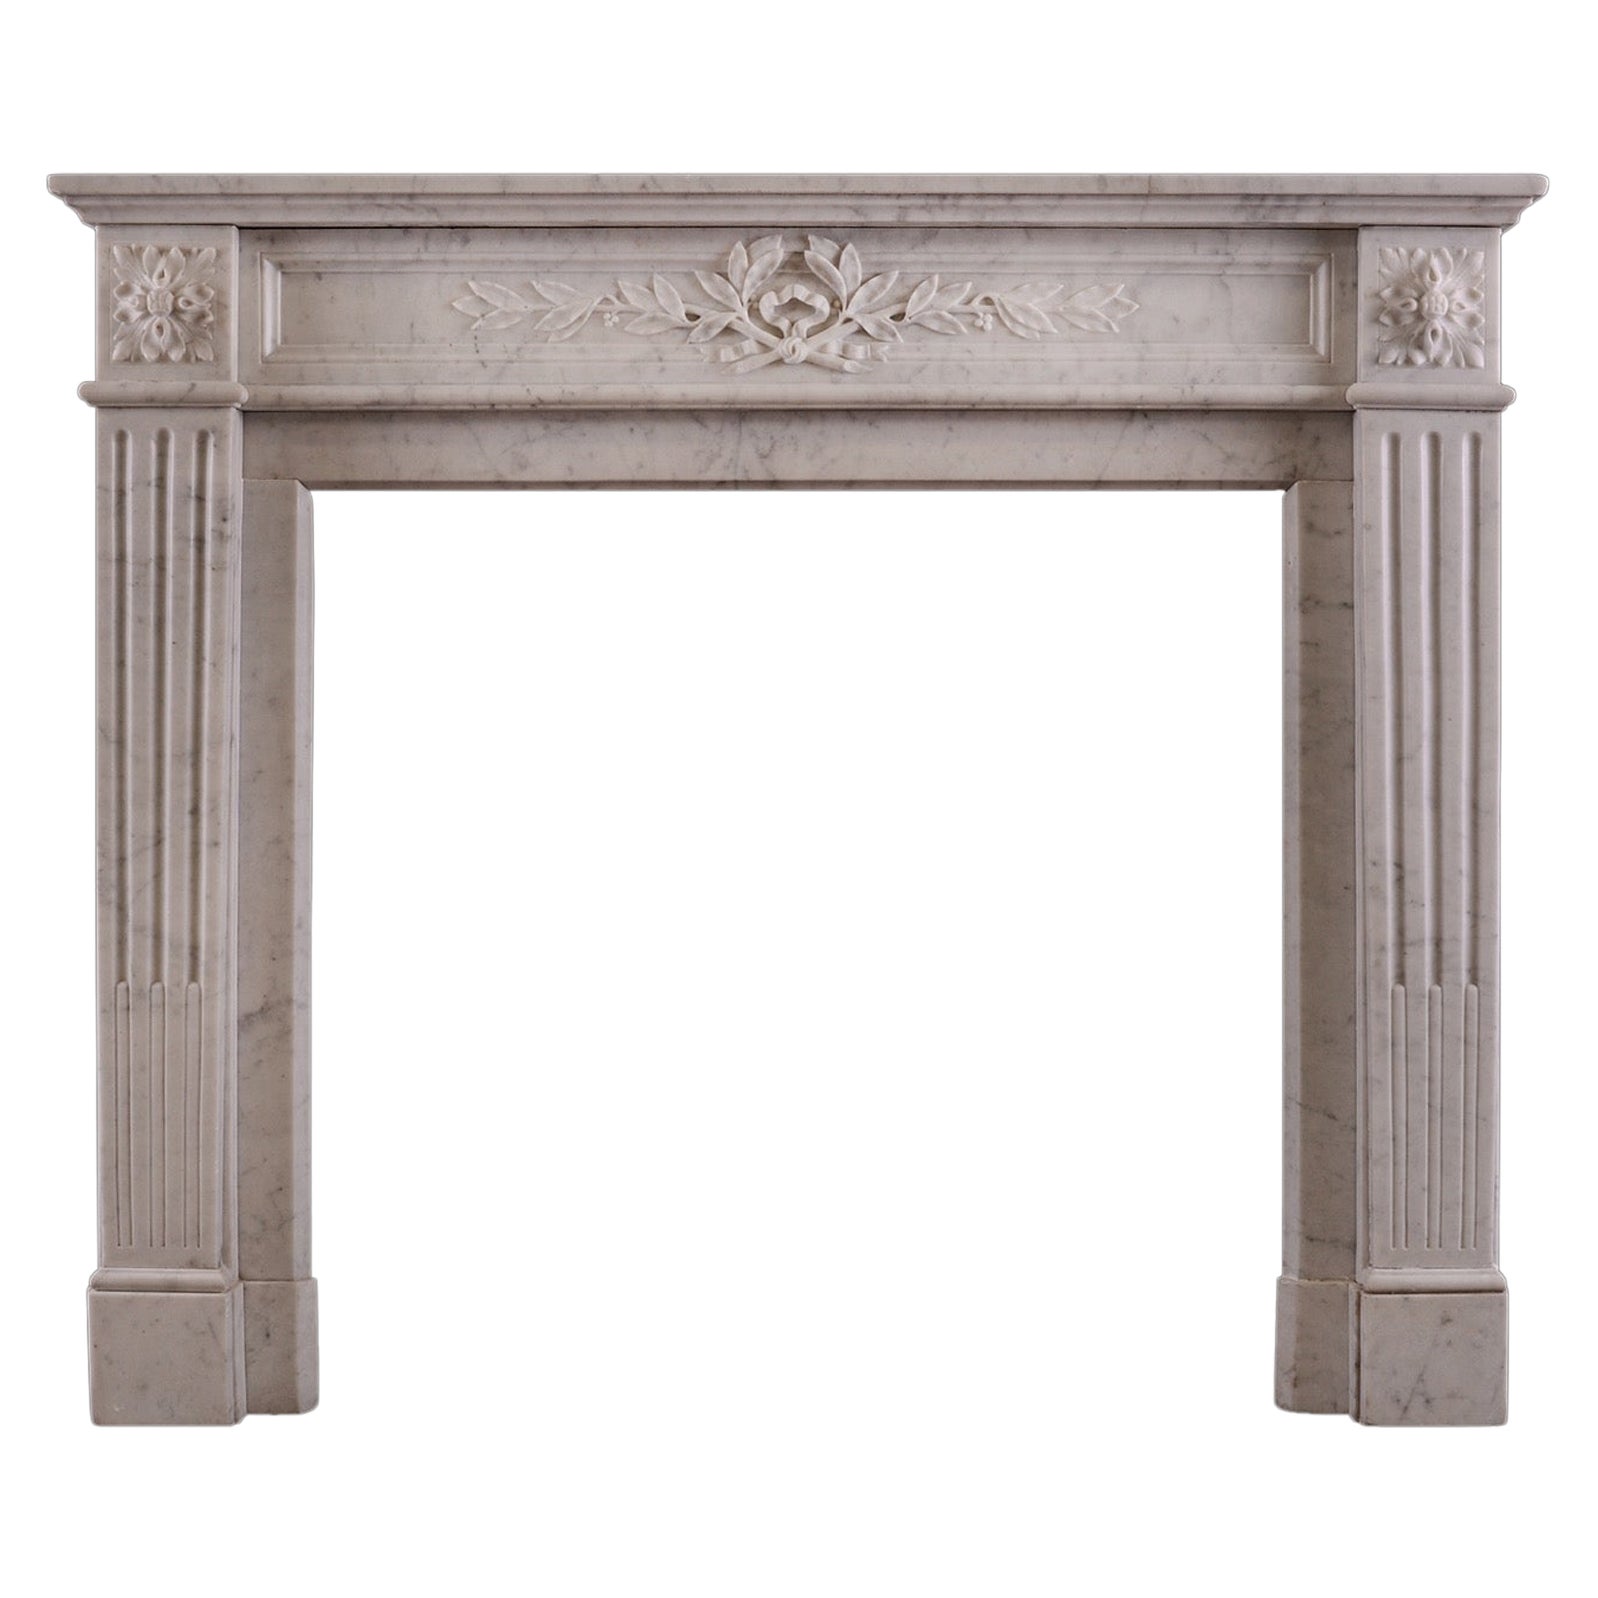 French Carrara Marble Fireplace in the Louis XVI Style For Sale